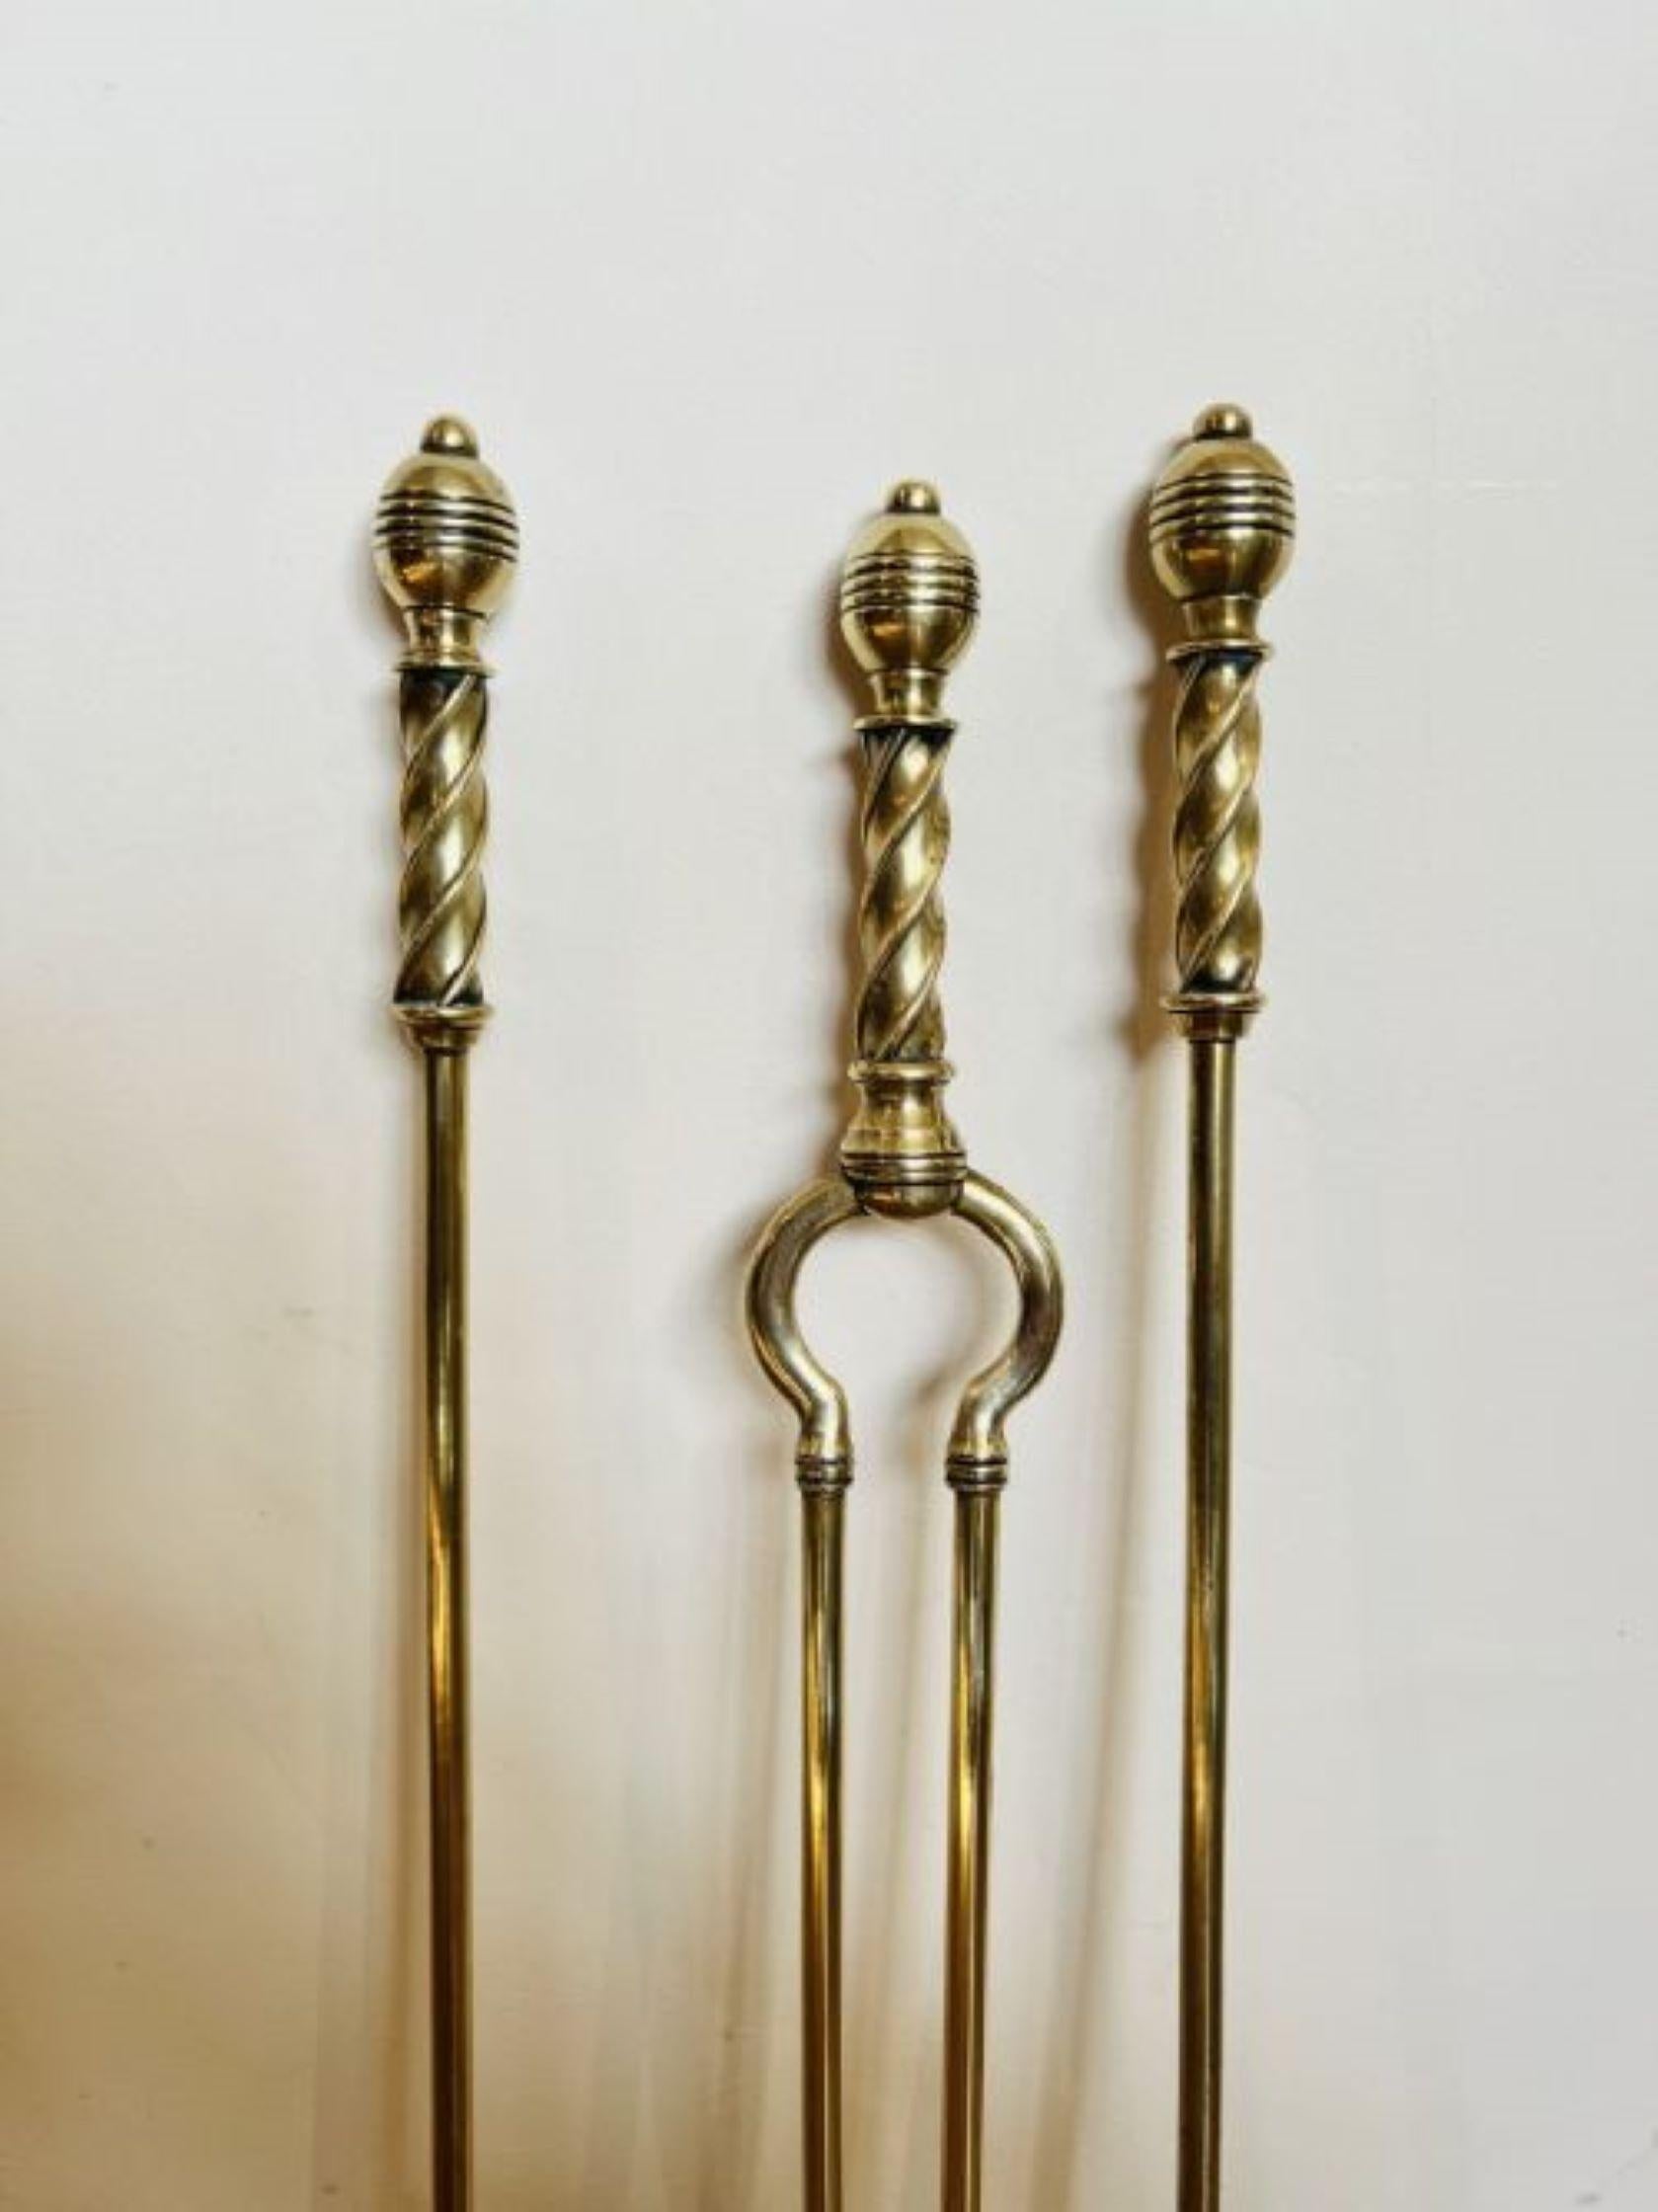 Antique Victorian quality brass fire irons having a quality set of fire irons with rope twist handles consisting of a shovel, poker and a pair of tongs.
